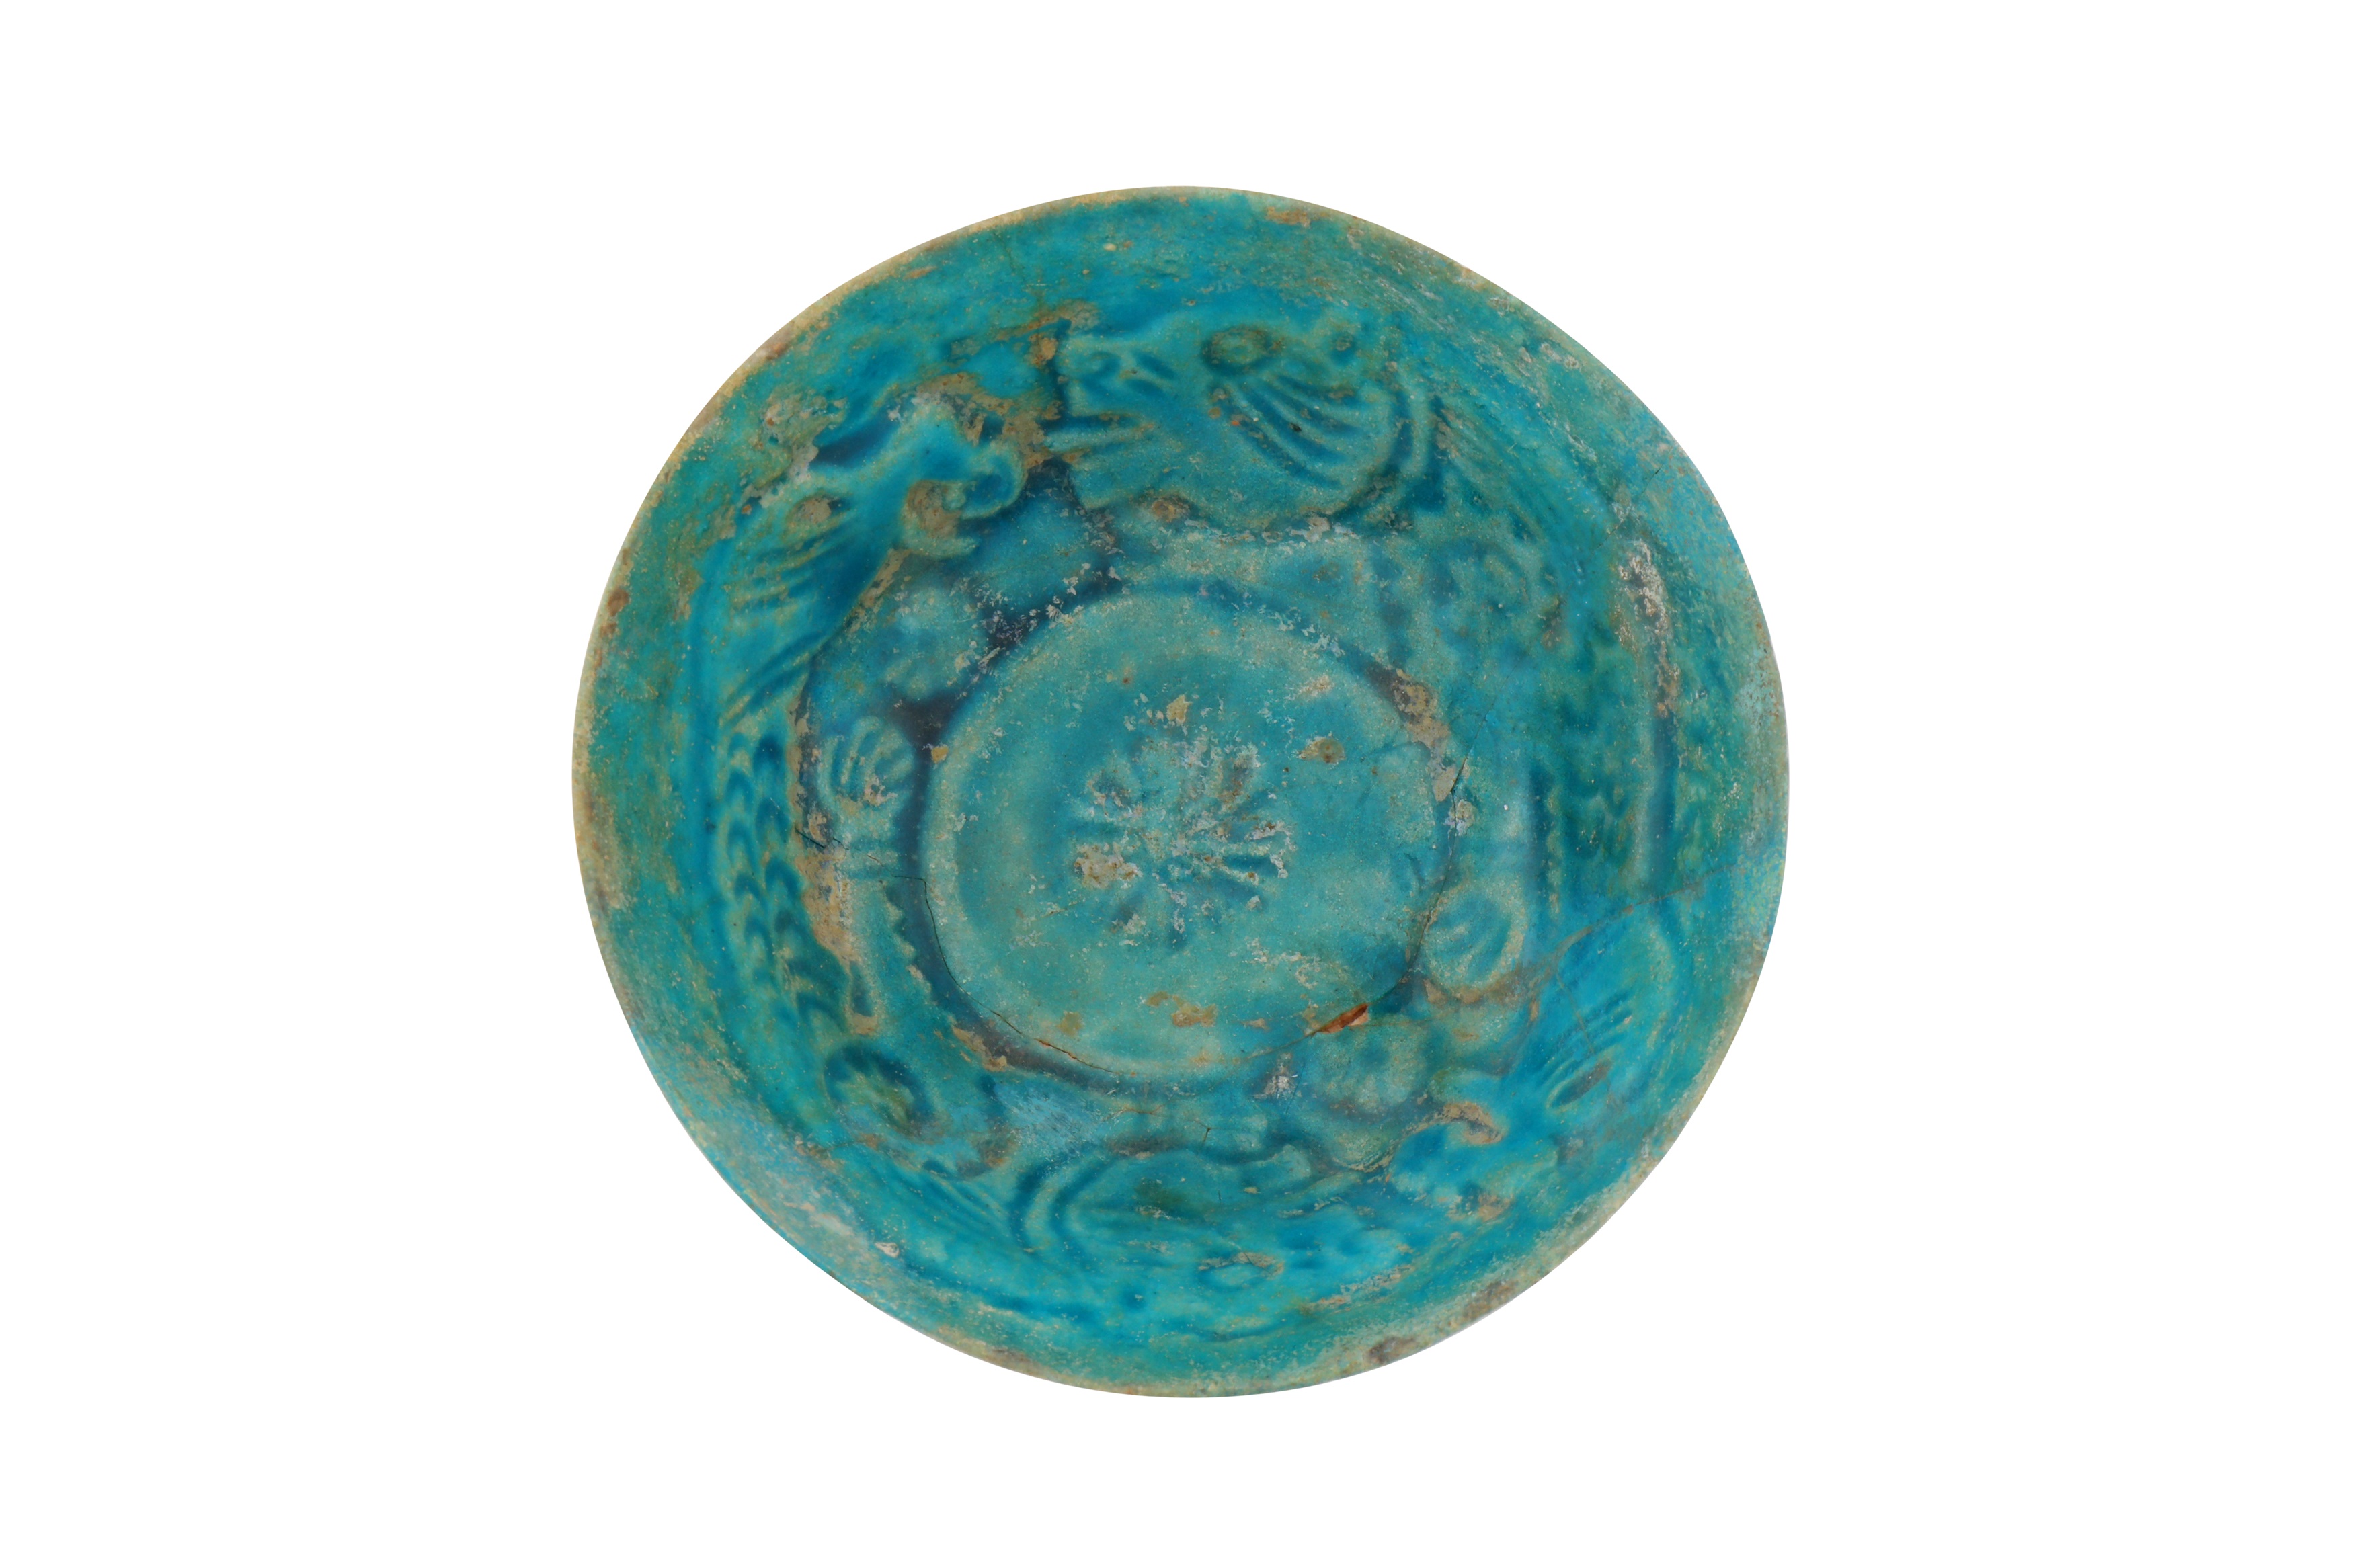 A 12TH-13TH CENTURY PERSIAN KASHAN TURQUOISE GLAZED POTTERY BOWL